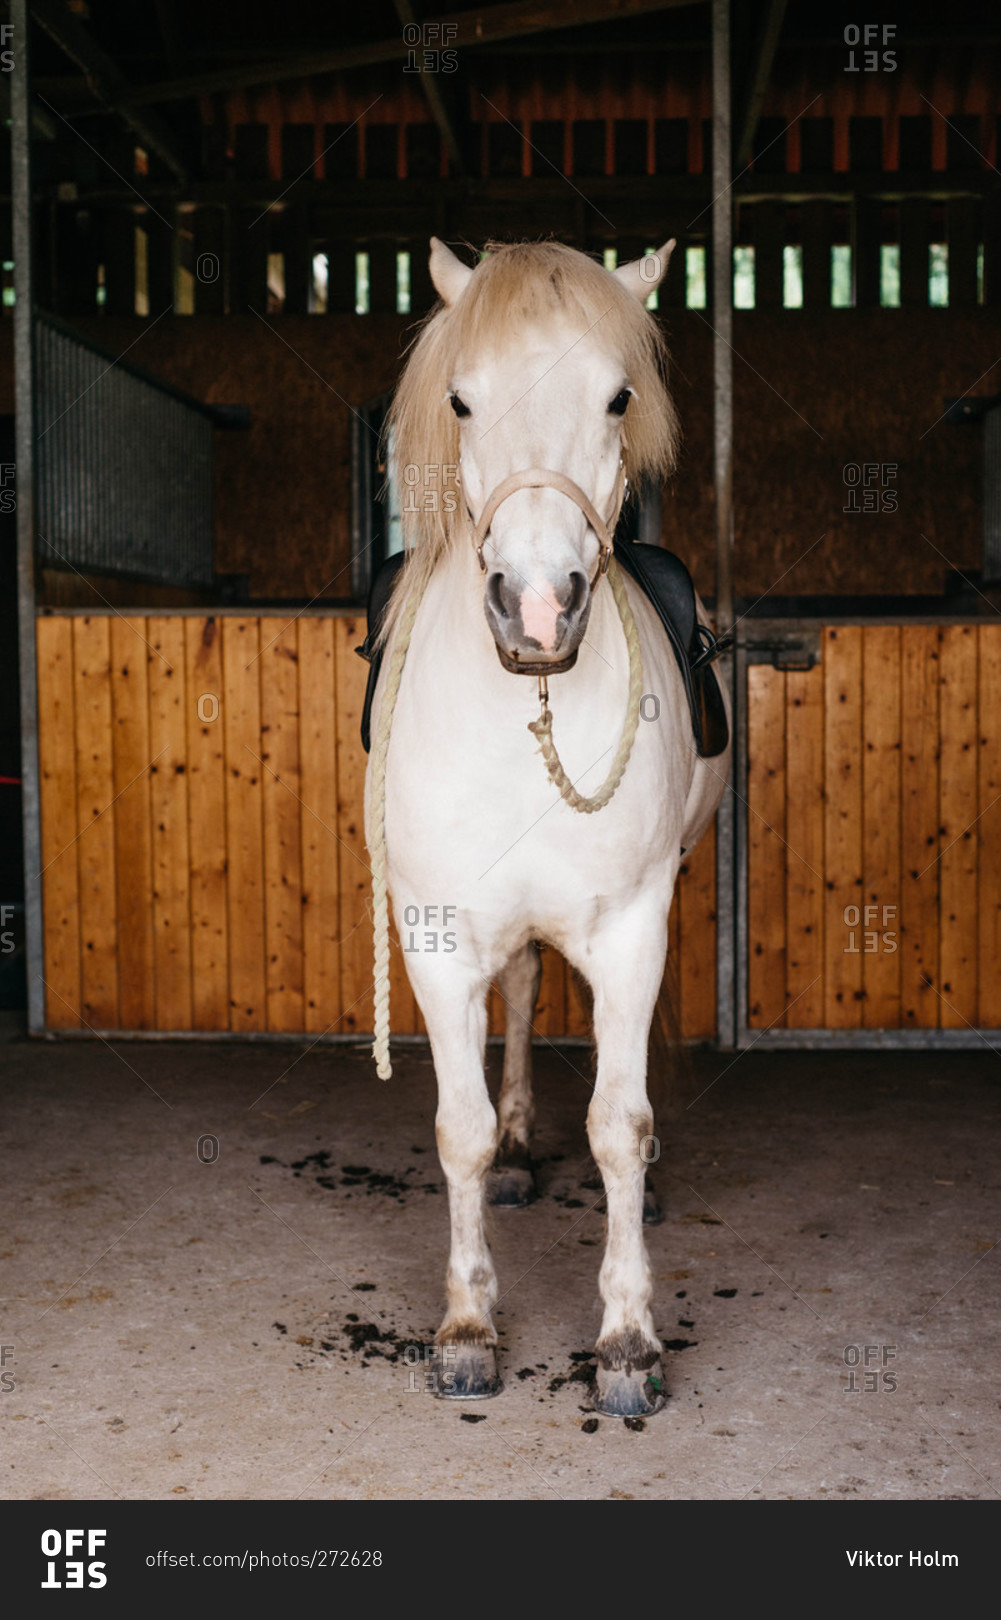 Saddled white horse in a stable